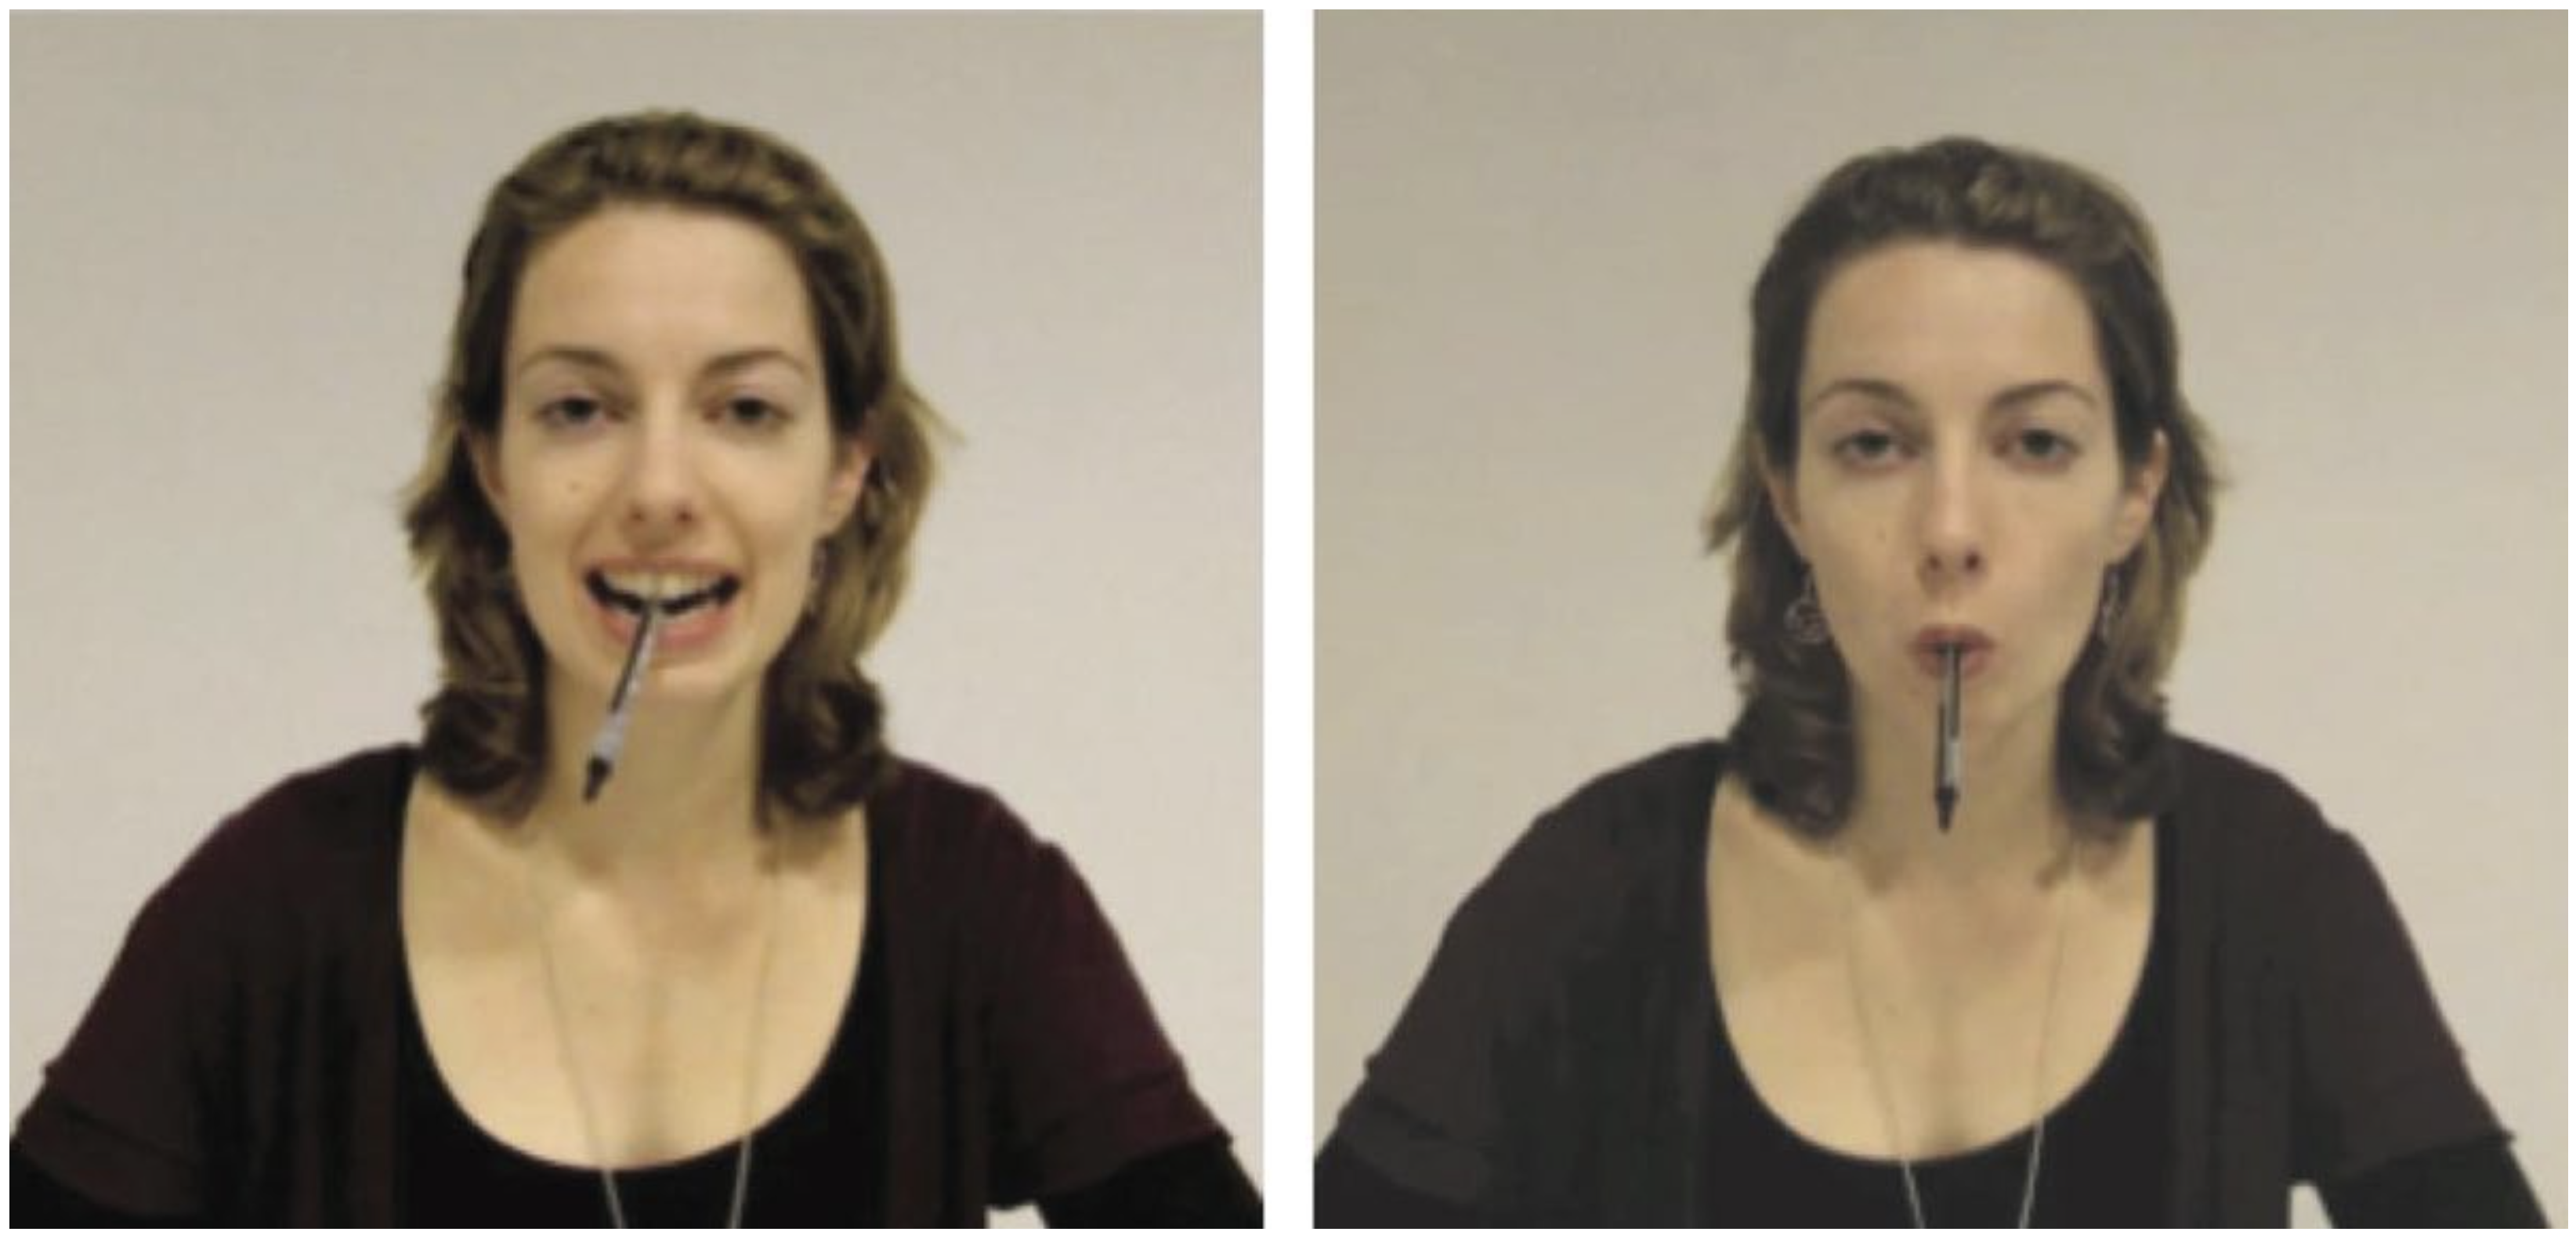 Demonstration of holding the pencil to force a smile (left) or frown (right) [@Wagenmakers2016-bj].